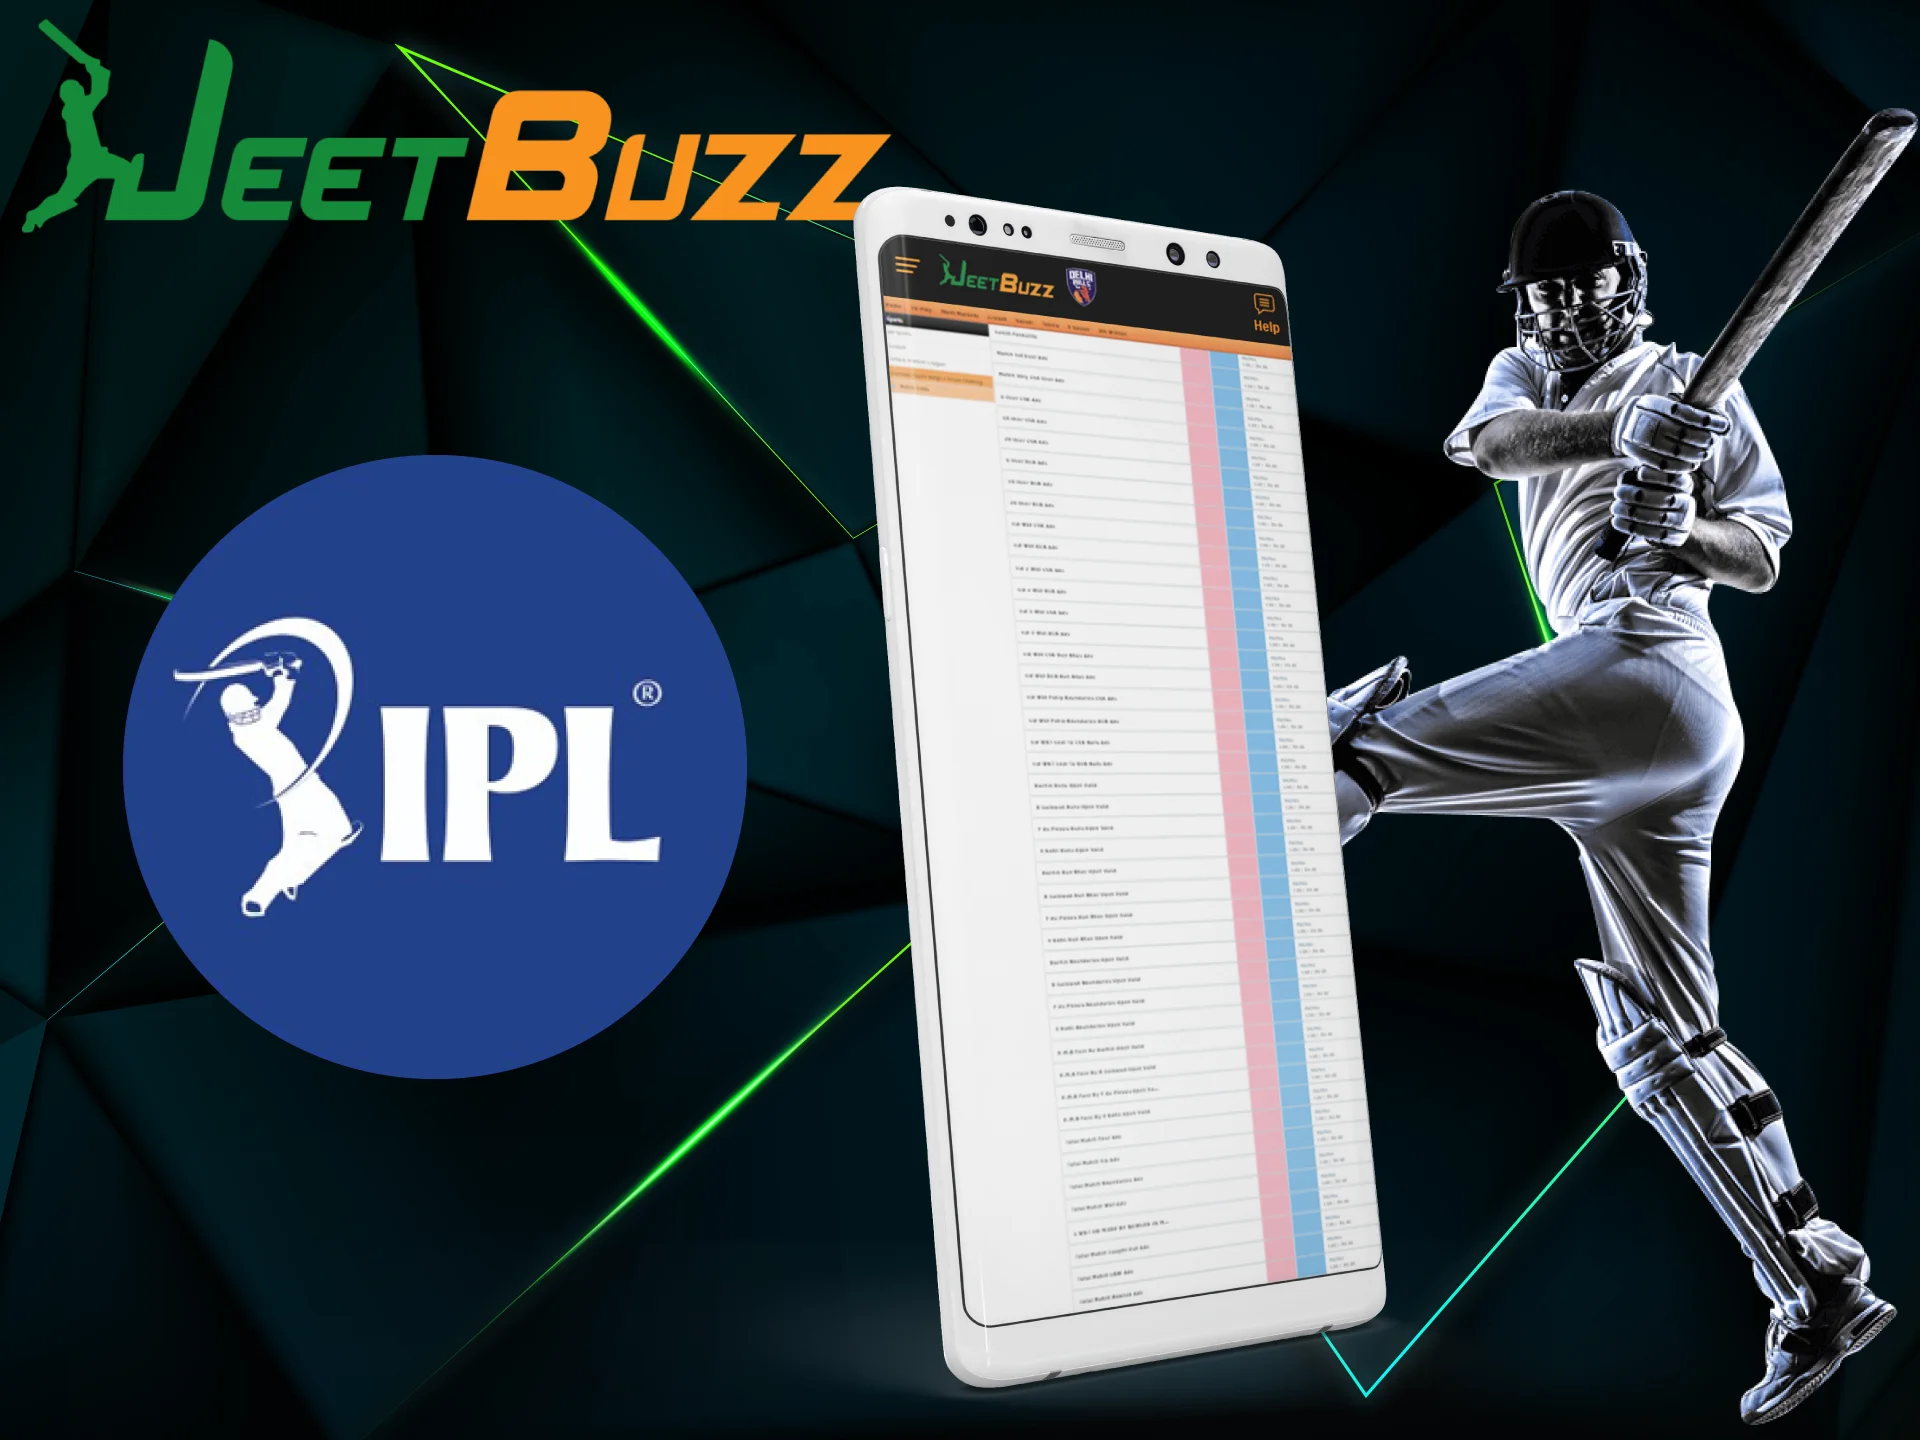 IPL betting is now available for Bangladeshi players via the JeetBuzz app.